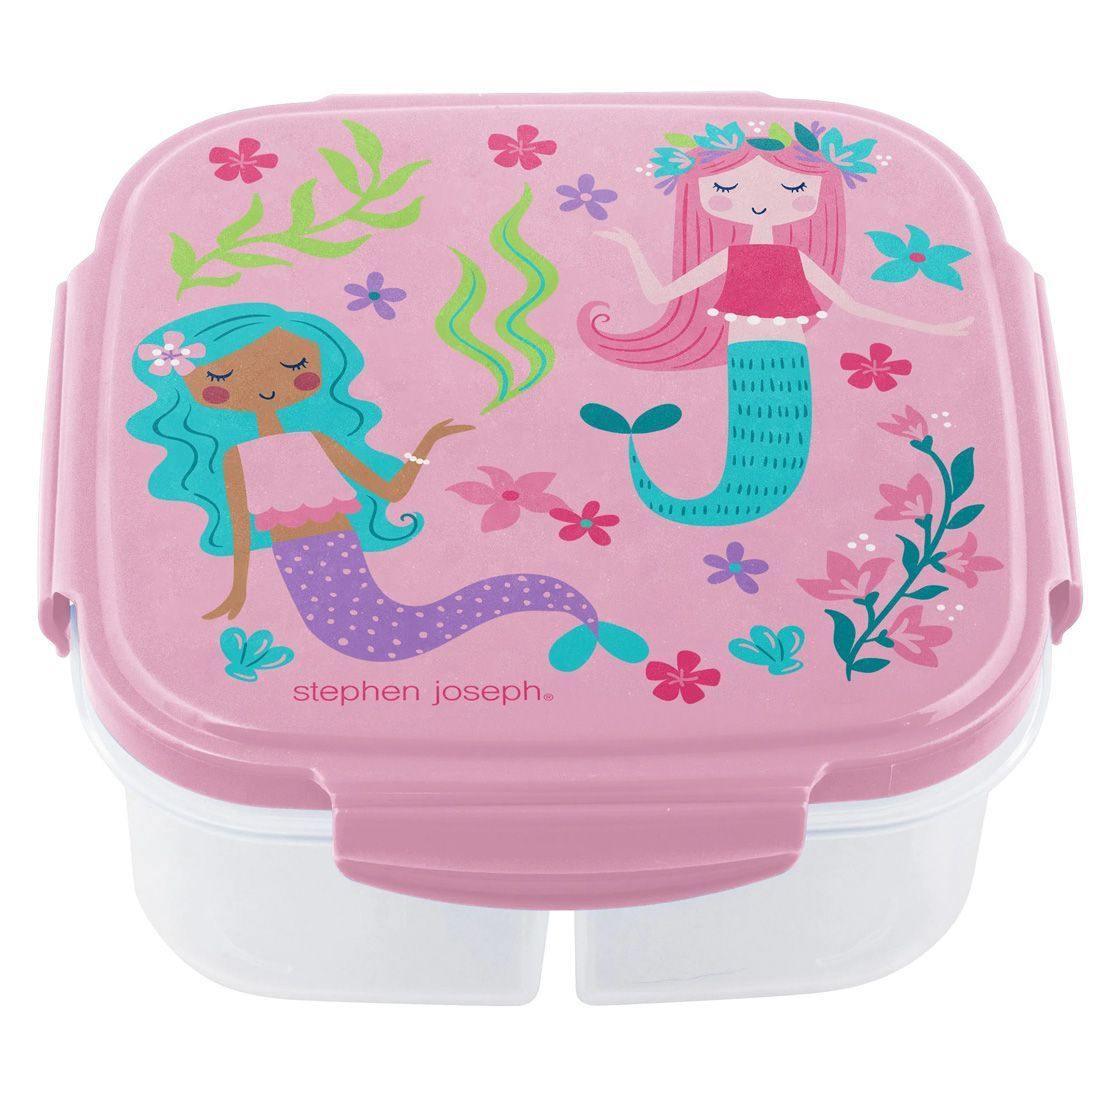 Stephen Joseph Snack Box With Ice Pack Mermaid - BumbleToys - 5-7 Years, Cecil, Girls, Lunch Box, Pre-Order, School Supplies